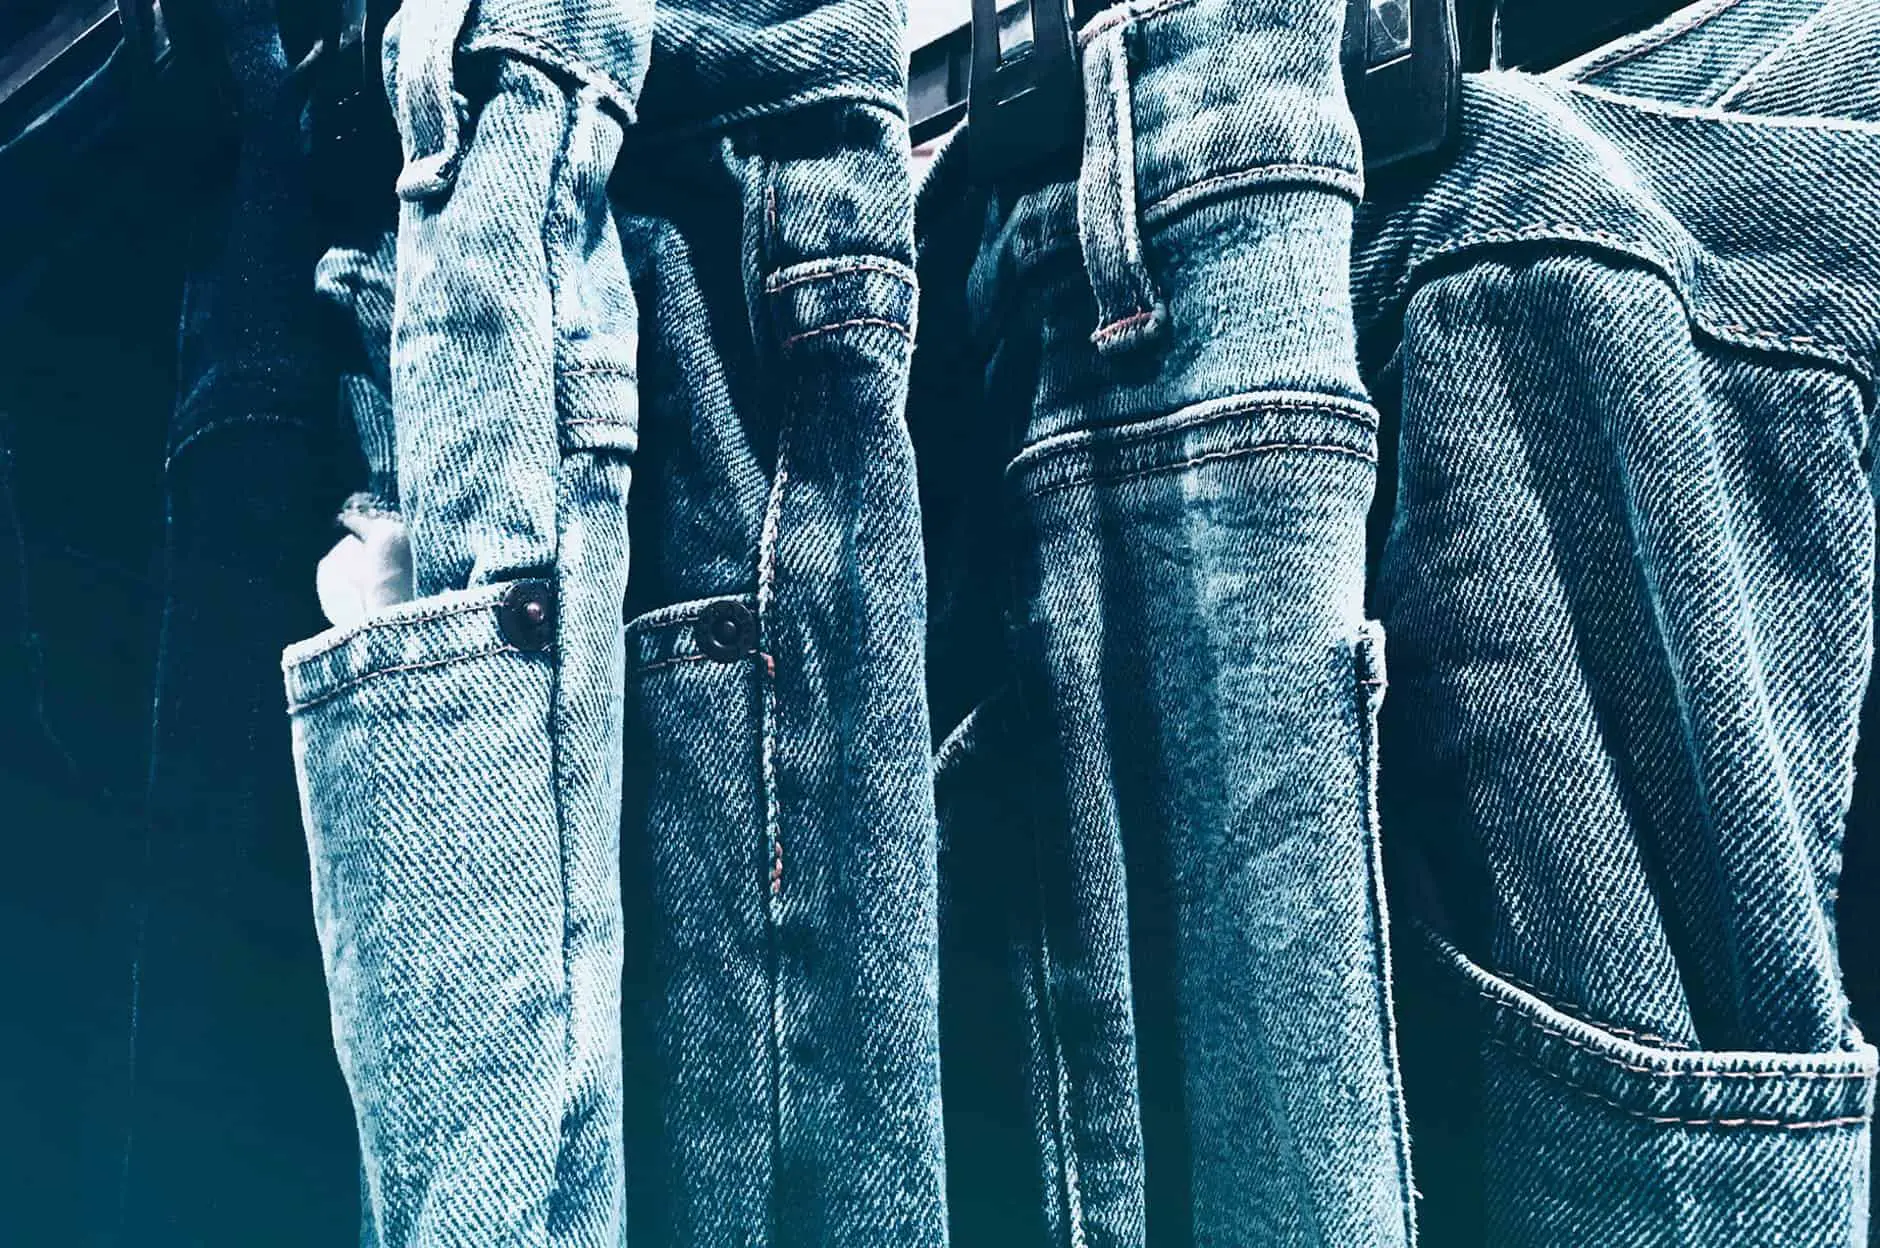 TOP 5 BOOTCUT JEANS BRANDS